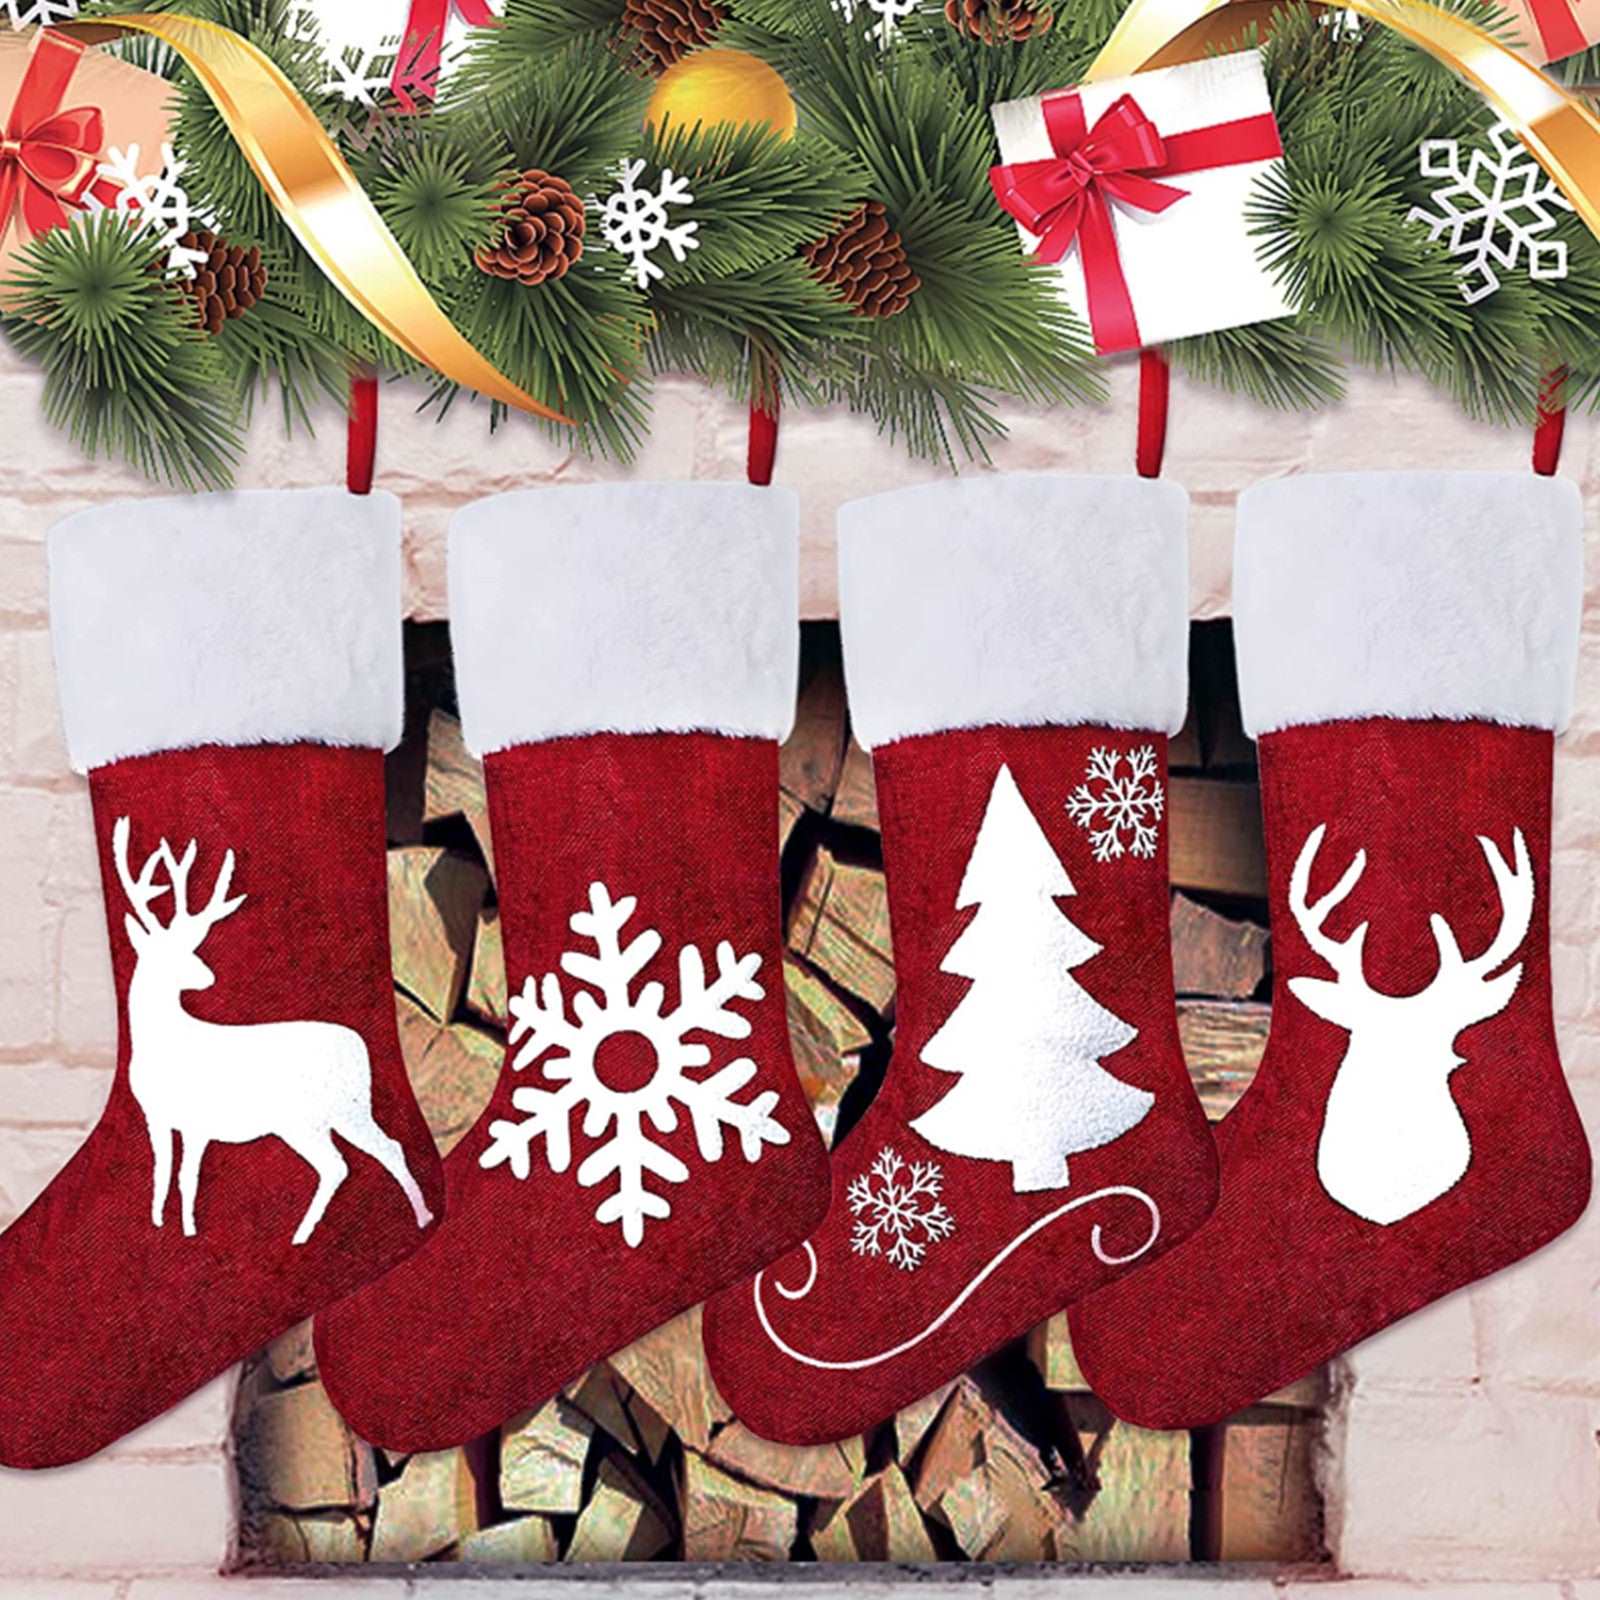 4 Pack 18 inch Christmas Decoration Stockings, Outdoor and Indoor Christmas decorations Items, Christmas ornaments, Christmas tree decorations, salt dough ornaments, Christmas window decorations, cheap Christmas decorations, snowmen, and ornaments.